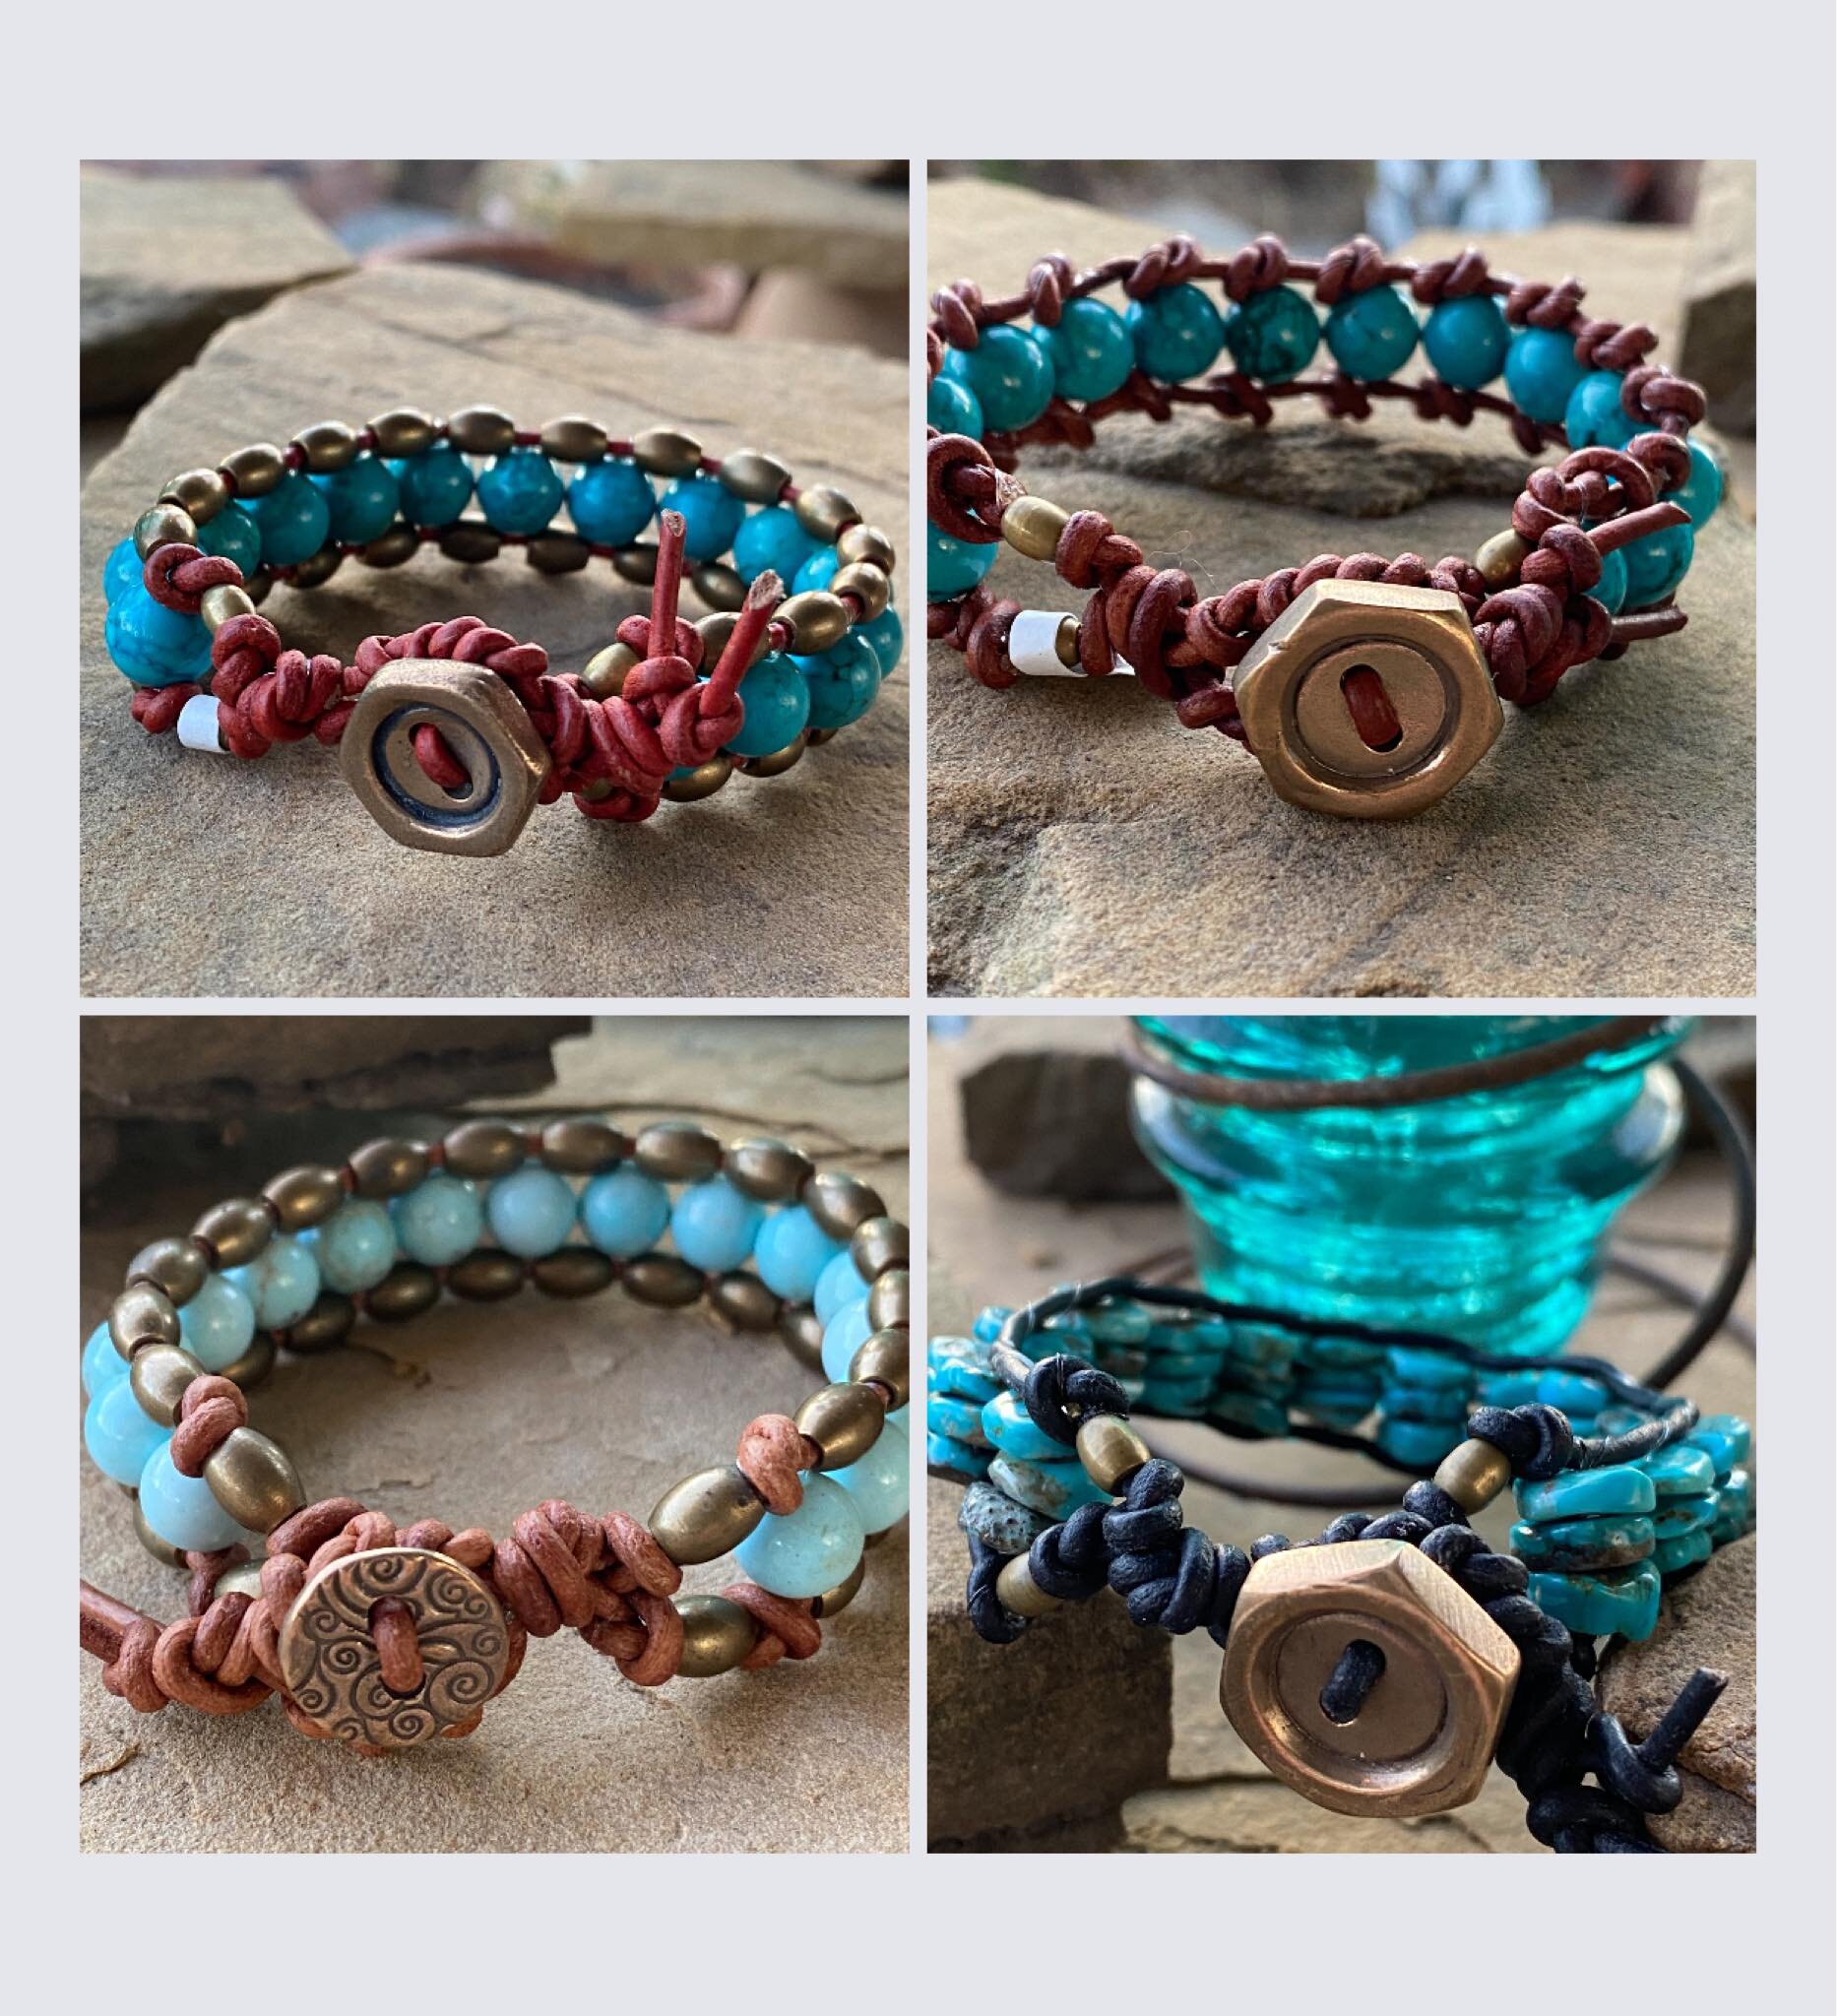 Wrapping up some final details for the Handmade Omaha Winter Art &amp; Craft Bazaar this weekend!

Turquoise Tuesday&hellip;it&rsquo;s a thing&hellip;these 4 turquoise bracelets are part of the collection I&rsquo;m bringing to the show&hellip;my favo